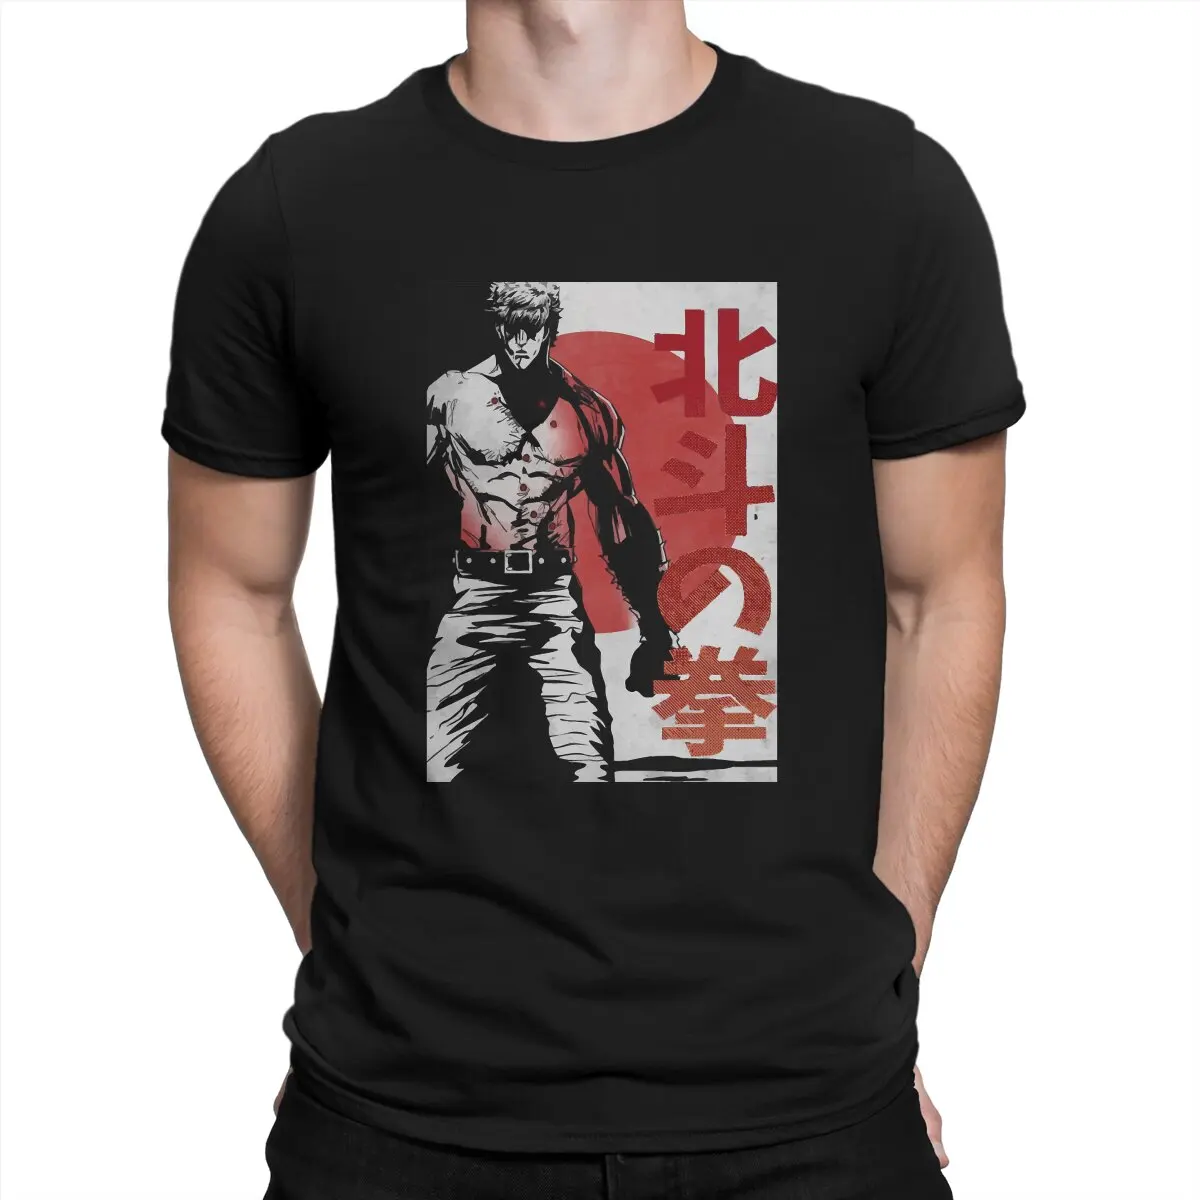 

Love Kenshiro T-Shirt for Men Fist of the North Star Japanese Manga Humor Pure Cotton Tees Round Neck Short Sleeve T Shirts Gift